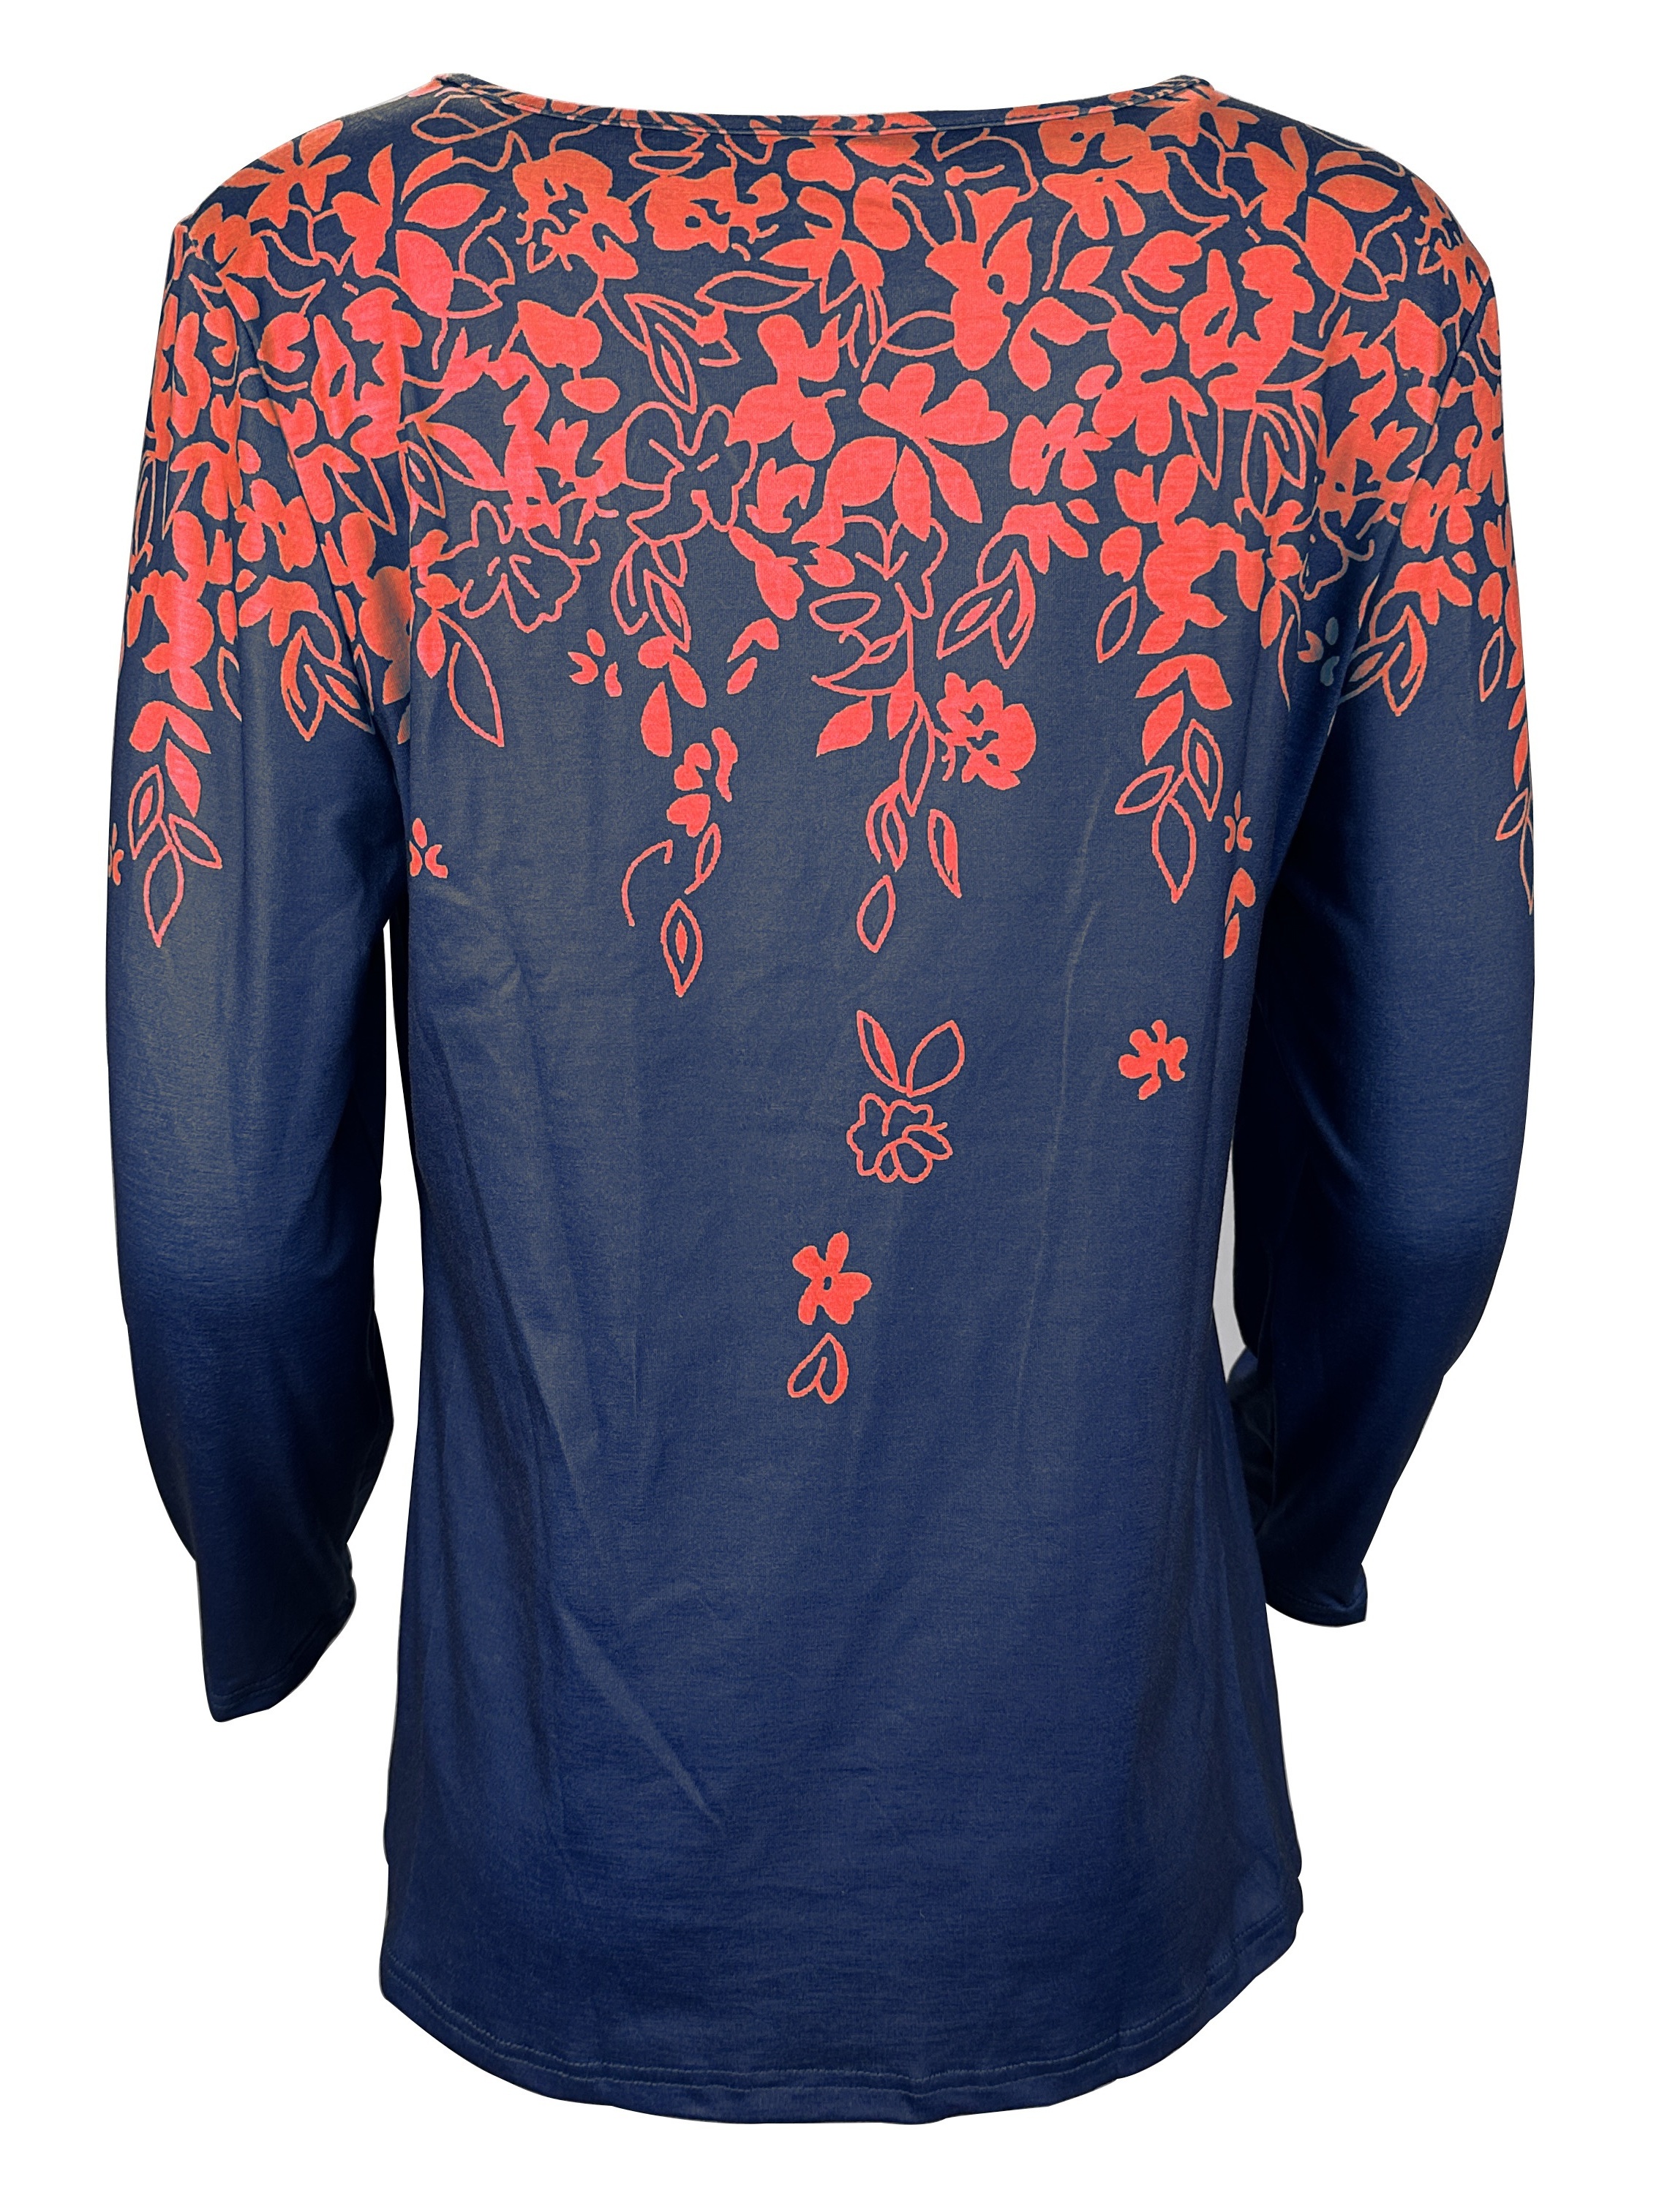 floral print crew neck top casual long sleeve top for spring fall womens clothing